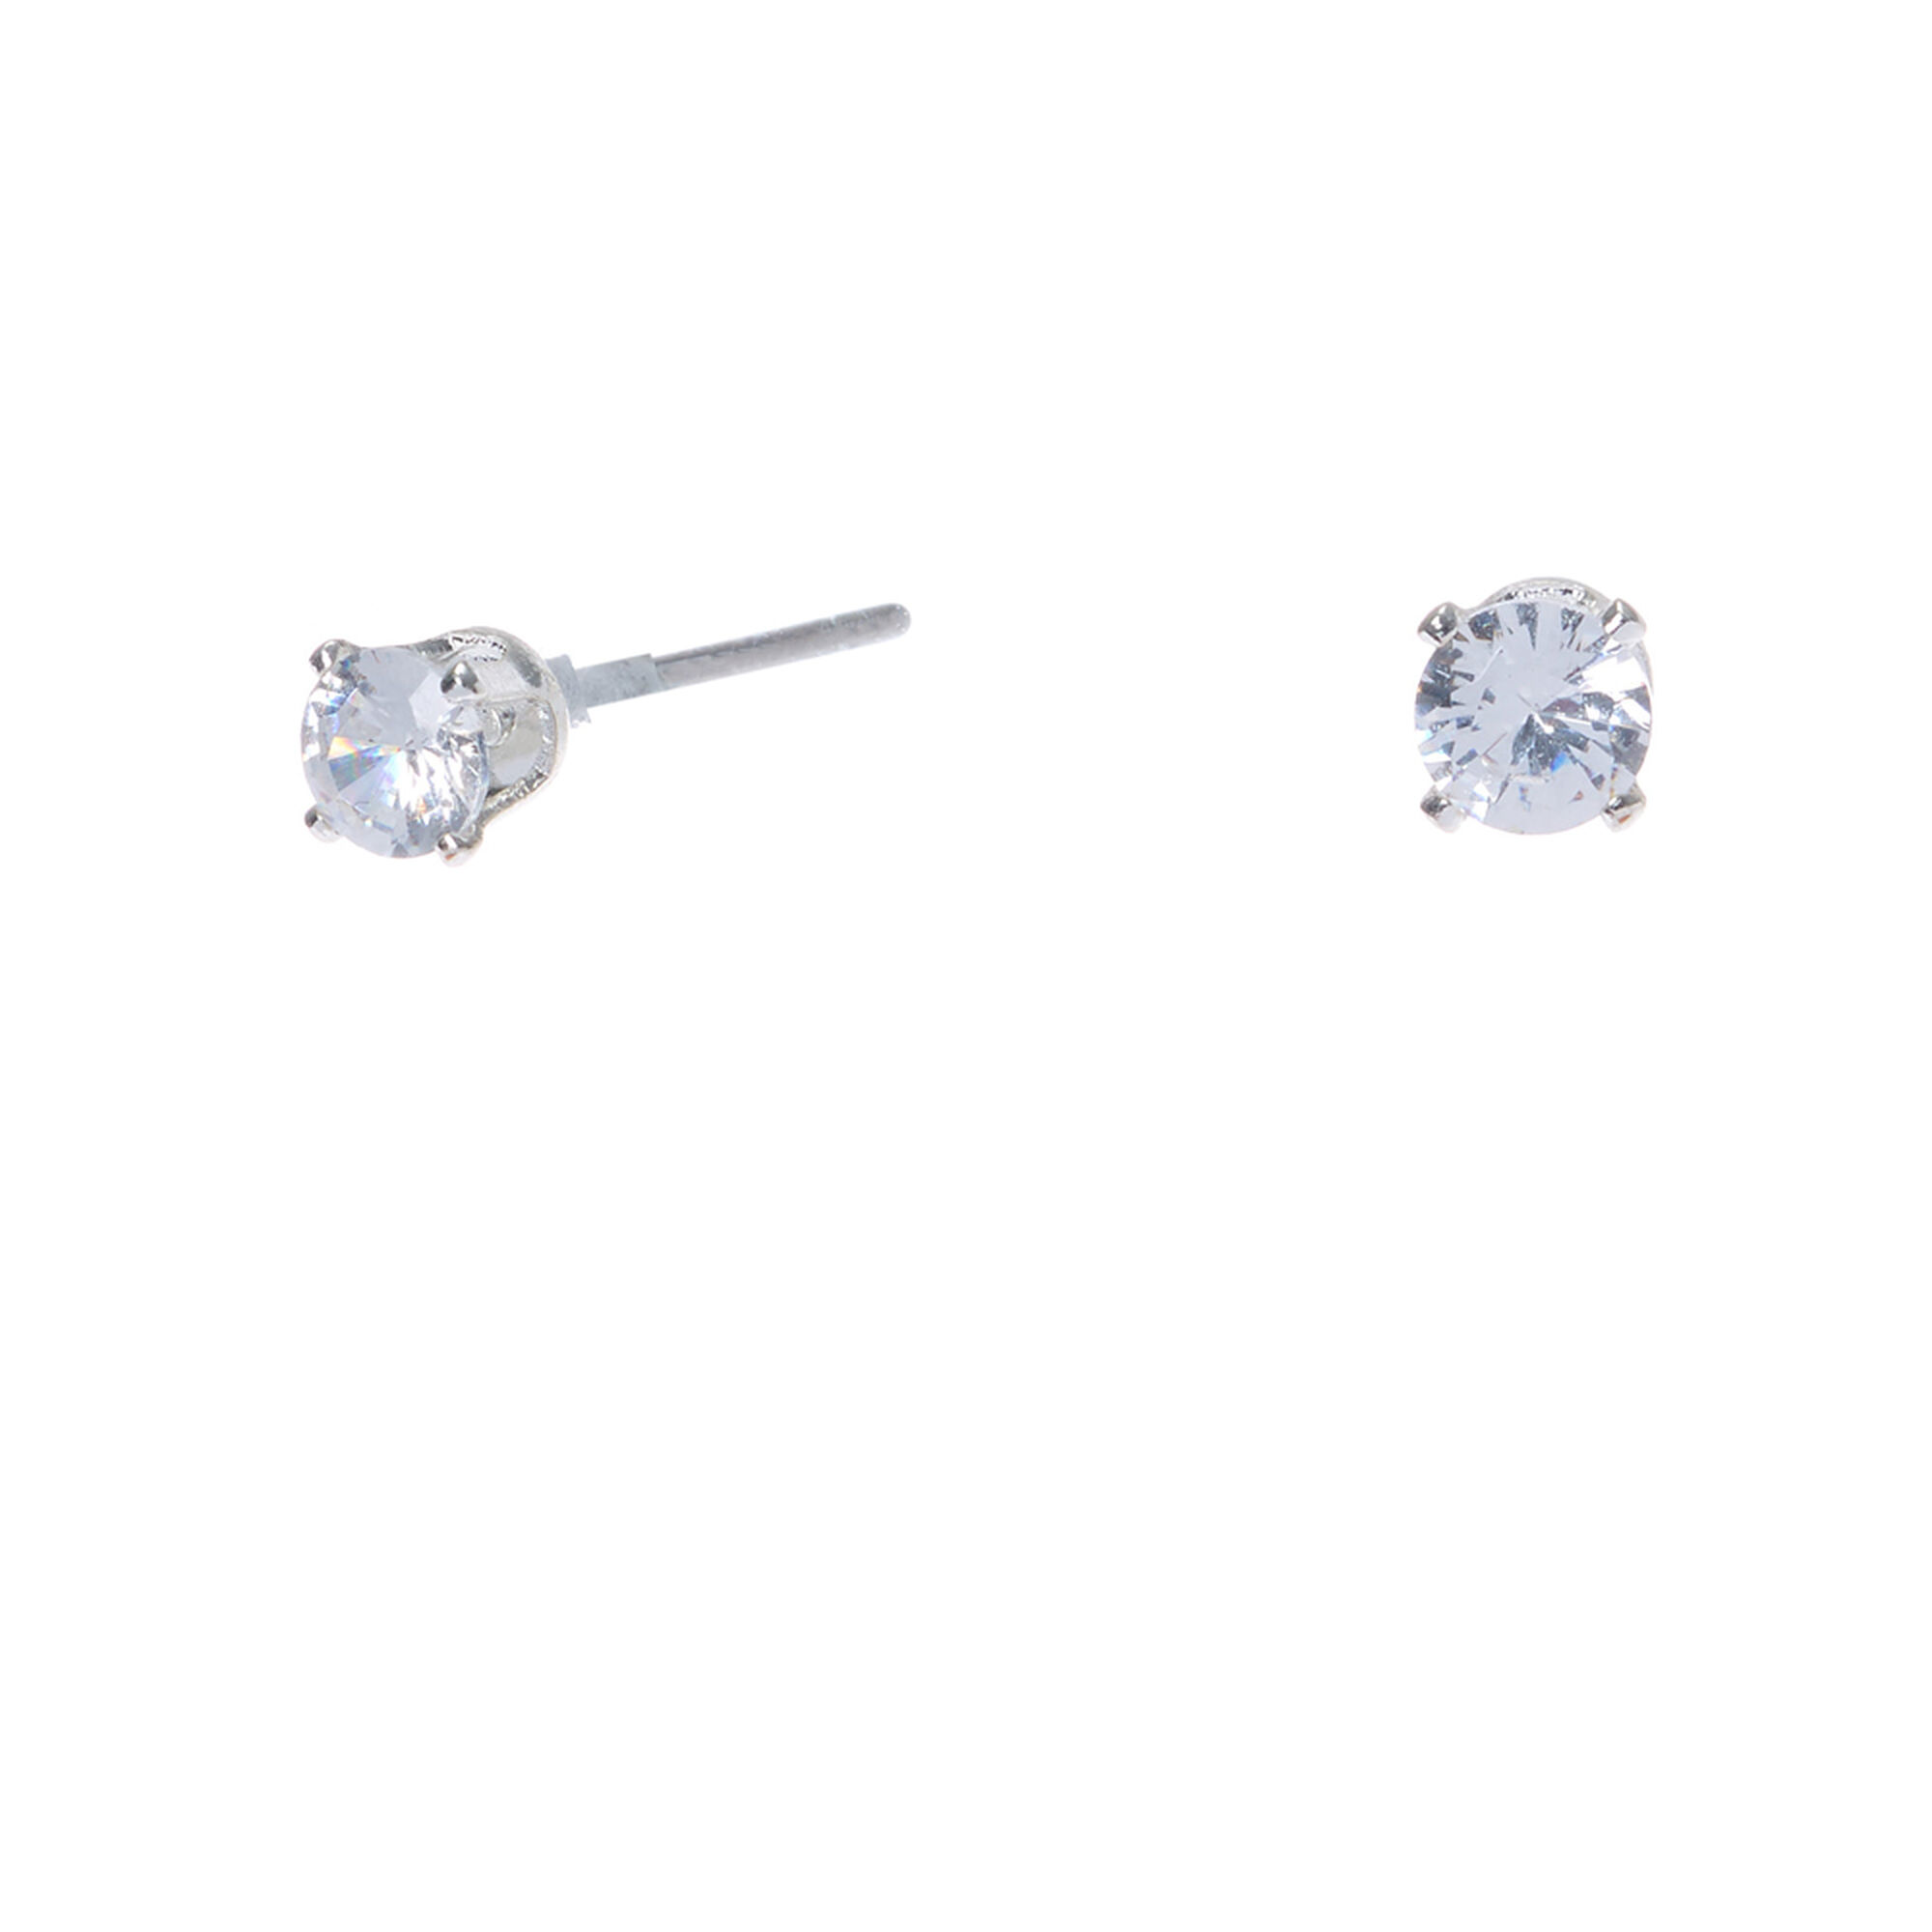 View Claires Tone Cubic Zirconia Round Stud Earrings 4MM Silver information